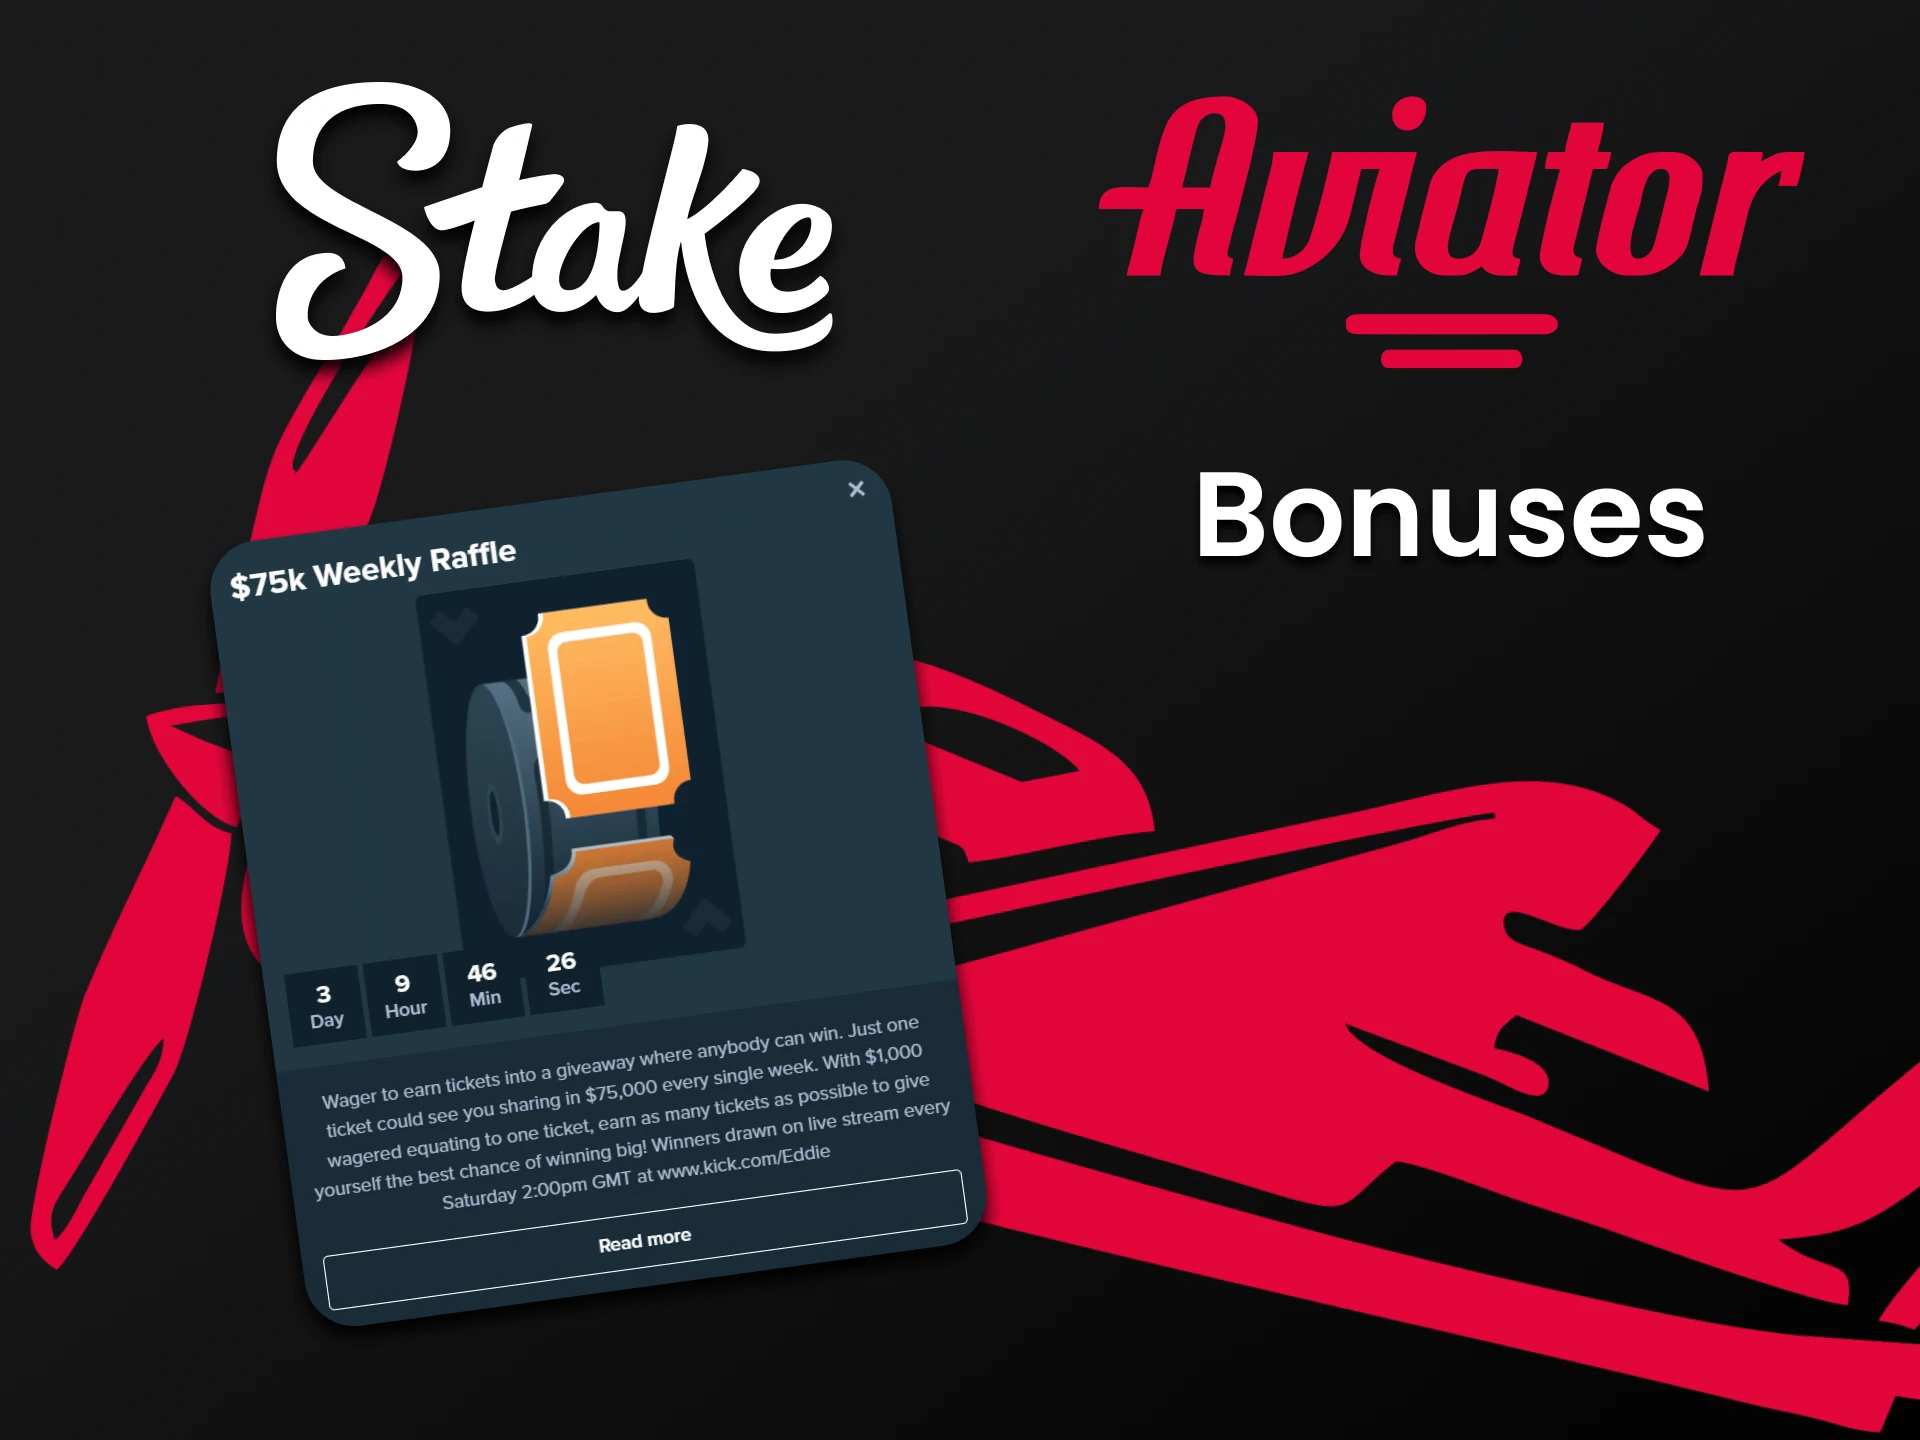 When playing Aviator you receive bonuses from Stake.